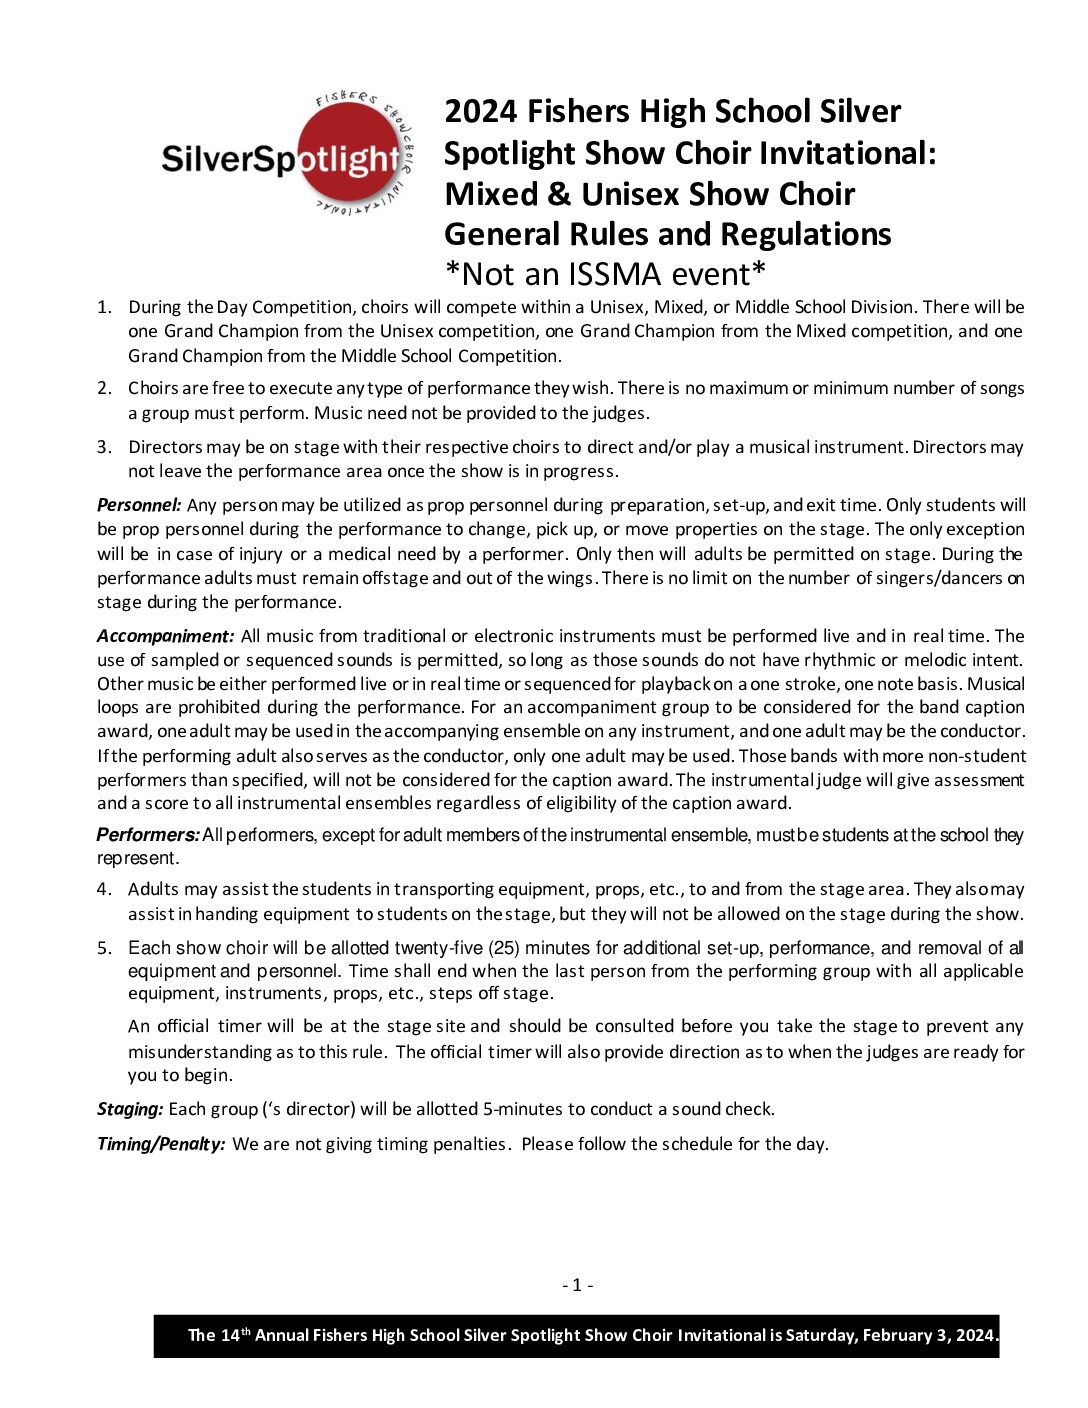 2024-FHS-Show-Choir-Rules-and-Regulations